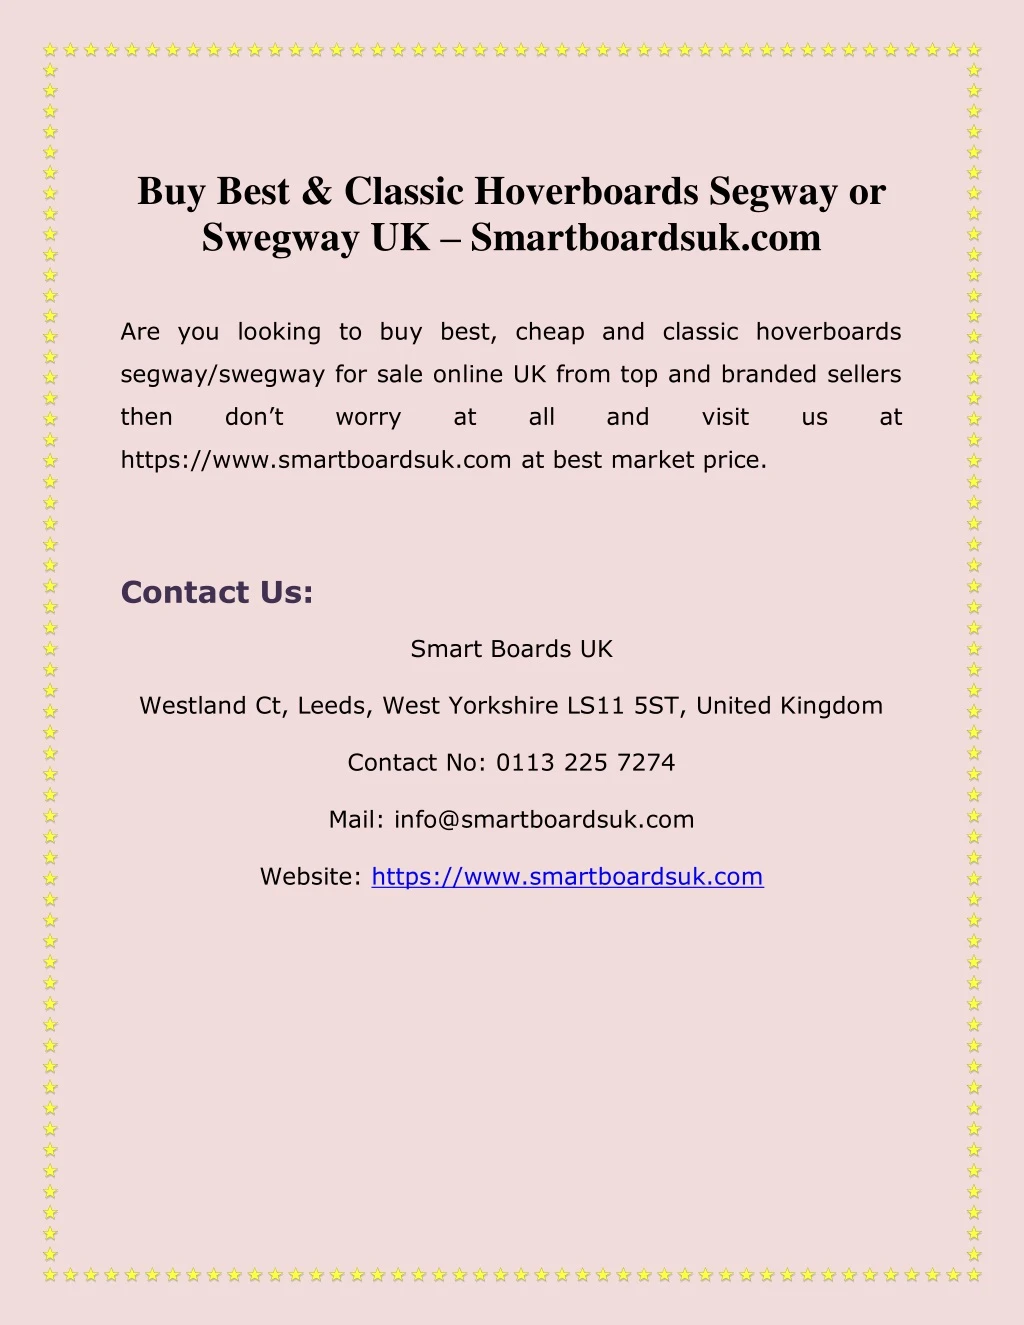 buy best classic hoverboards segway or swegway